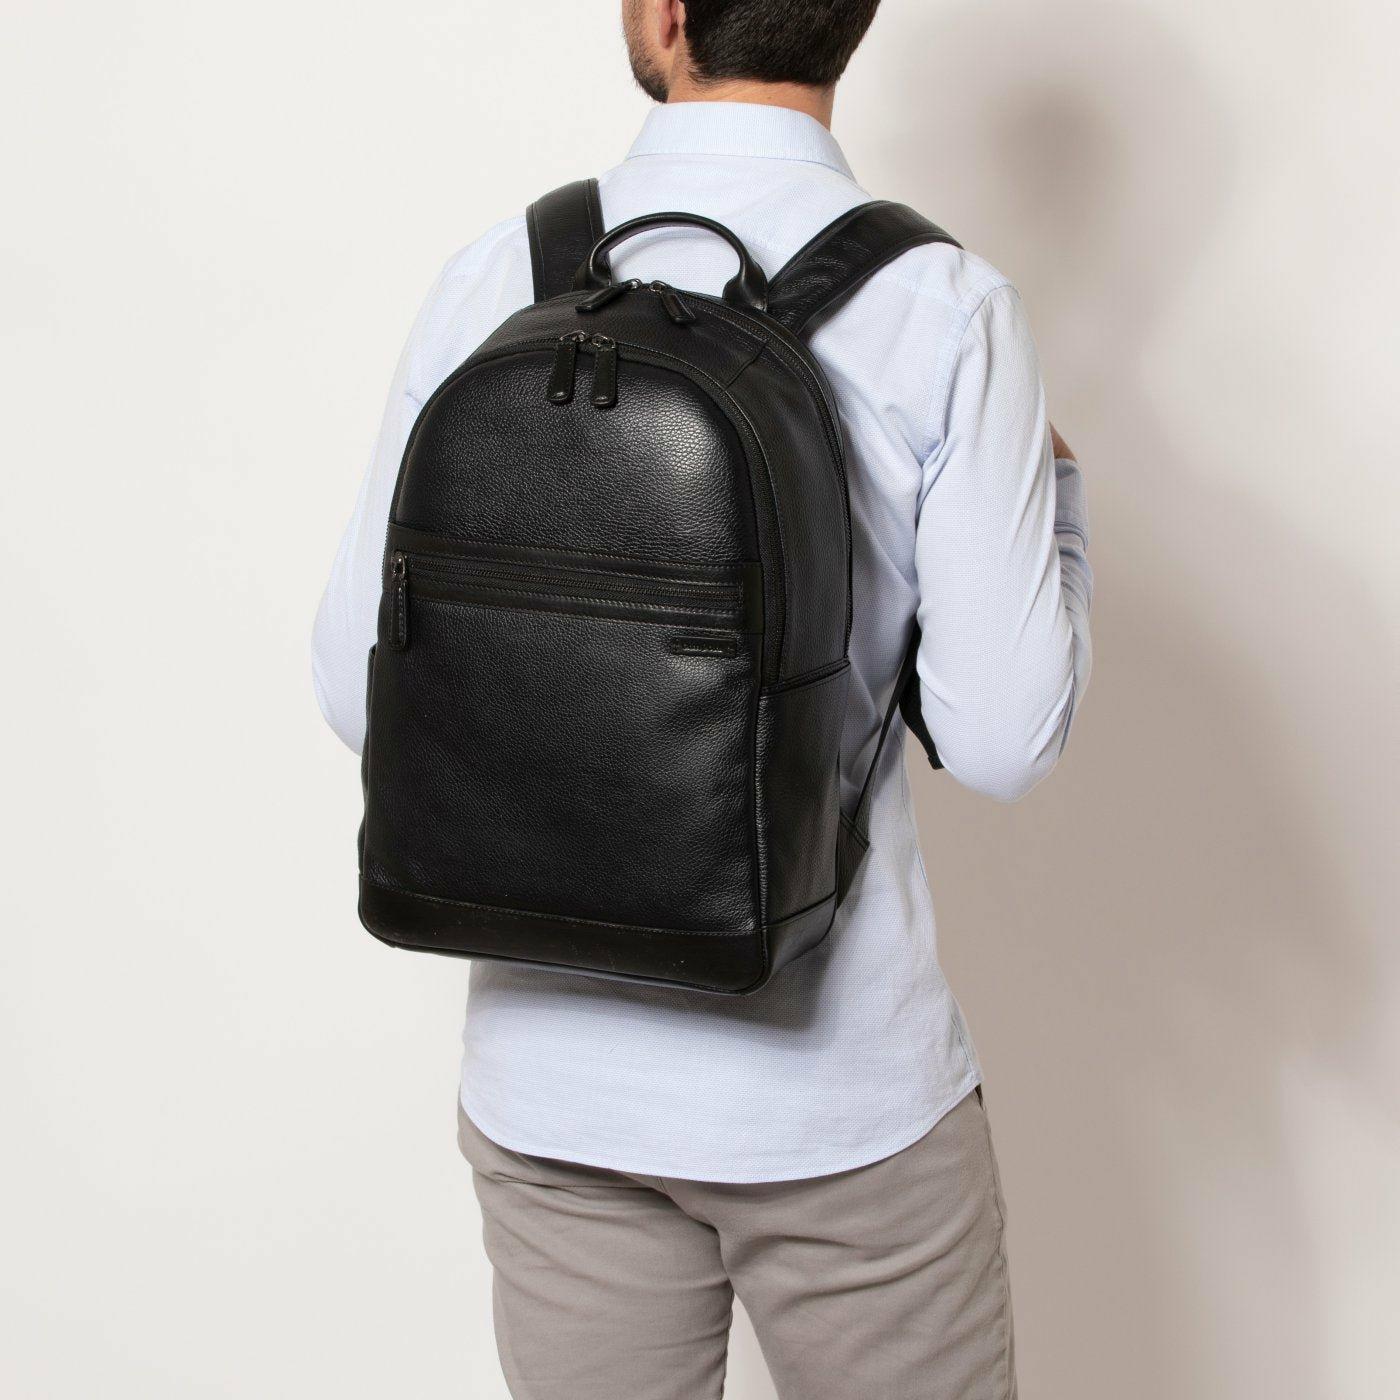 Gianni Conti 'Frey' Leather Backpack